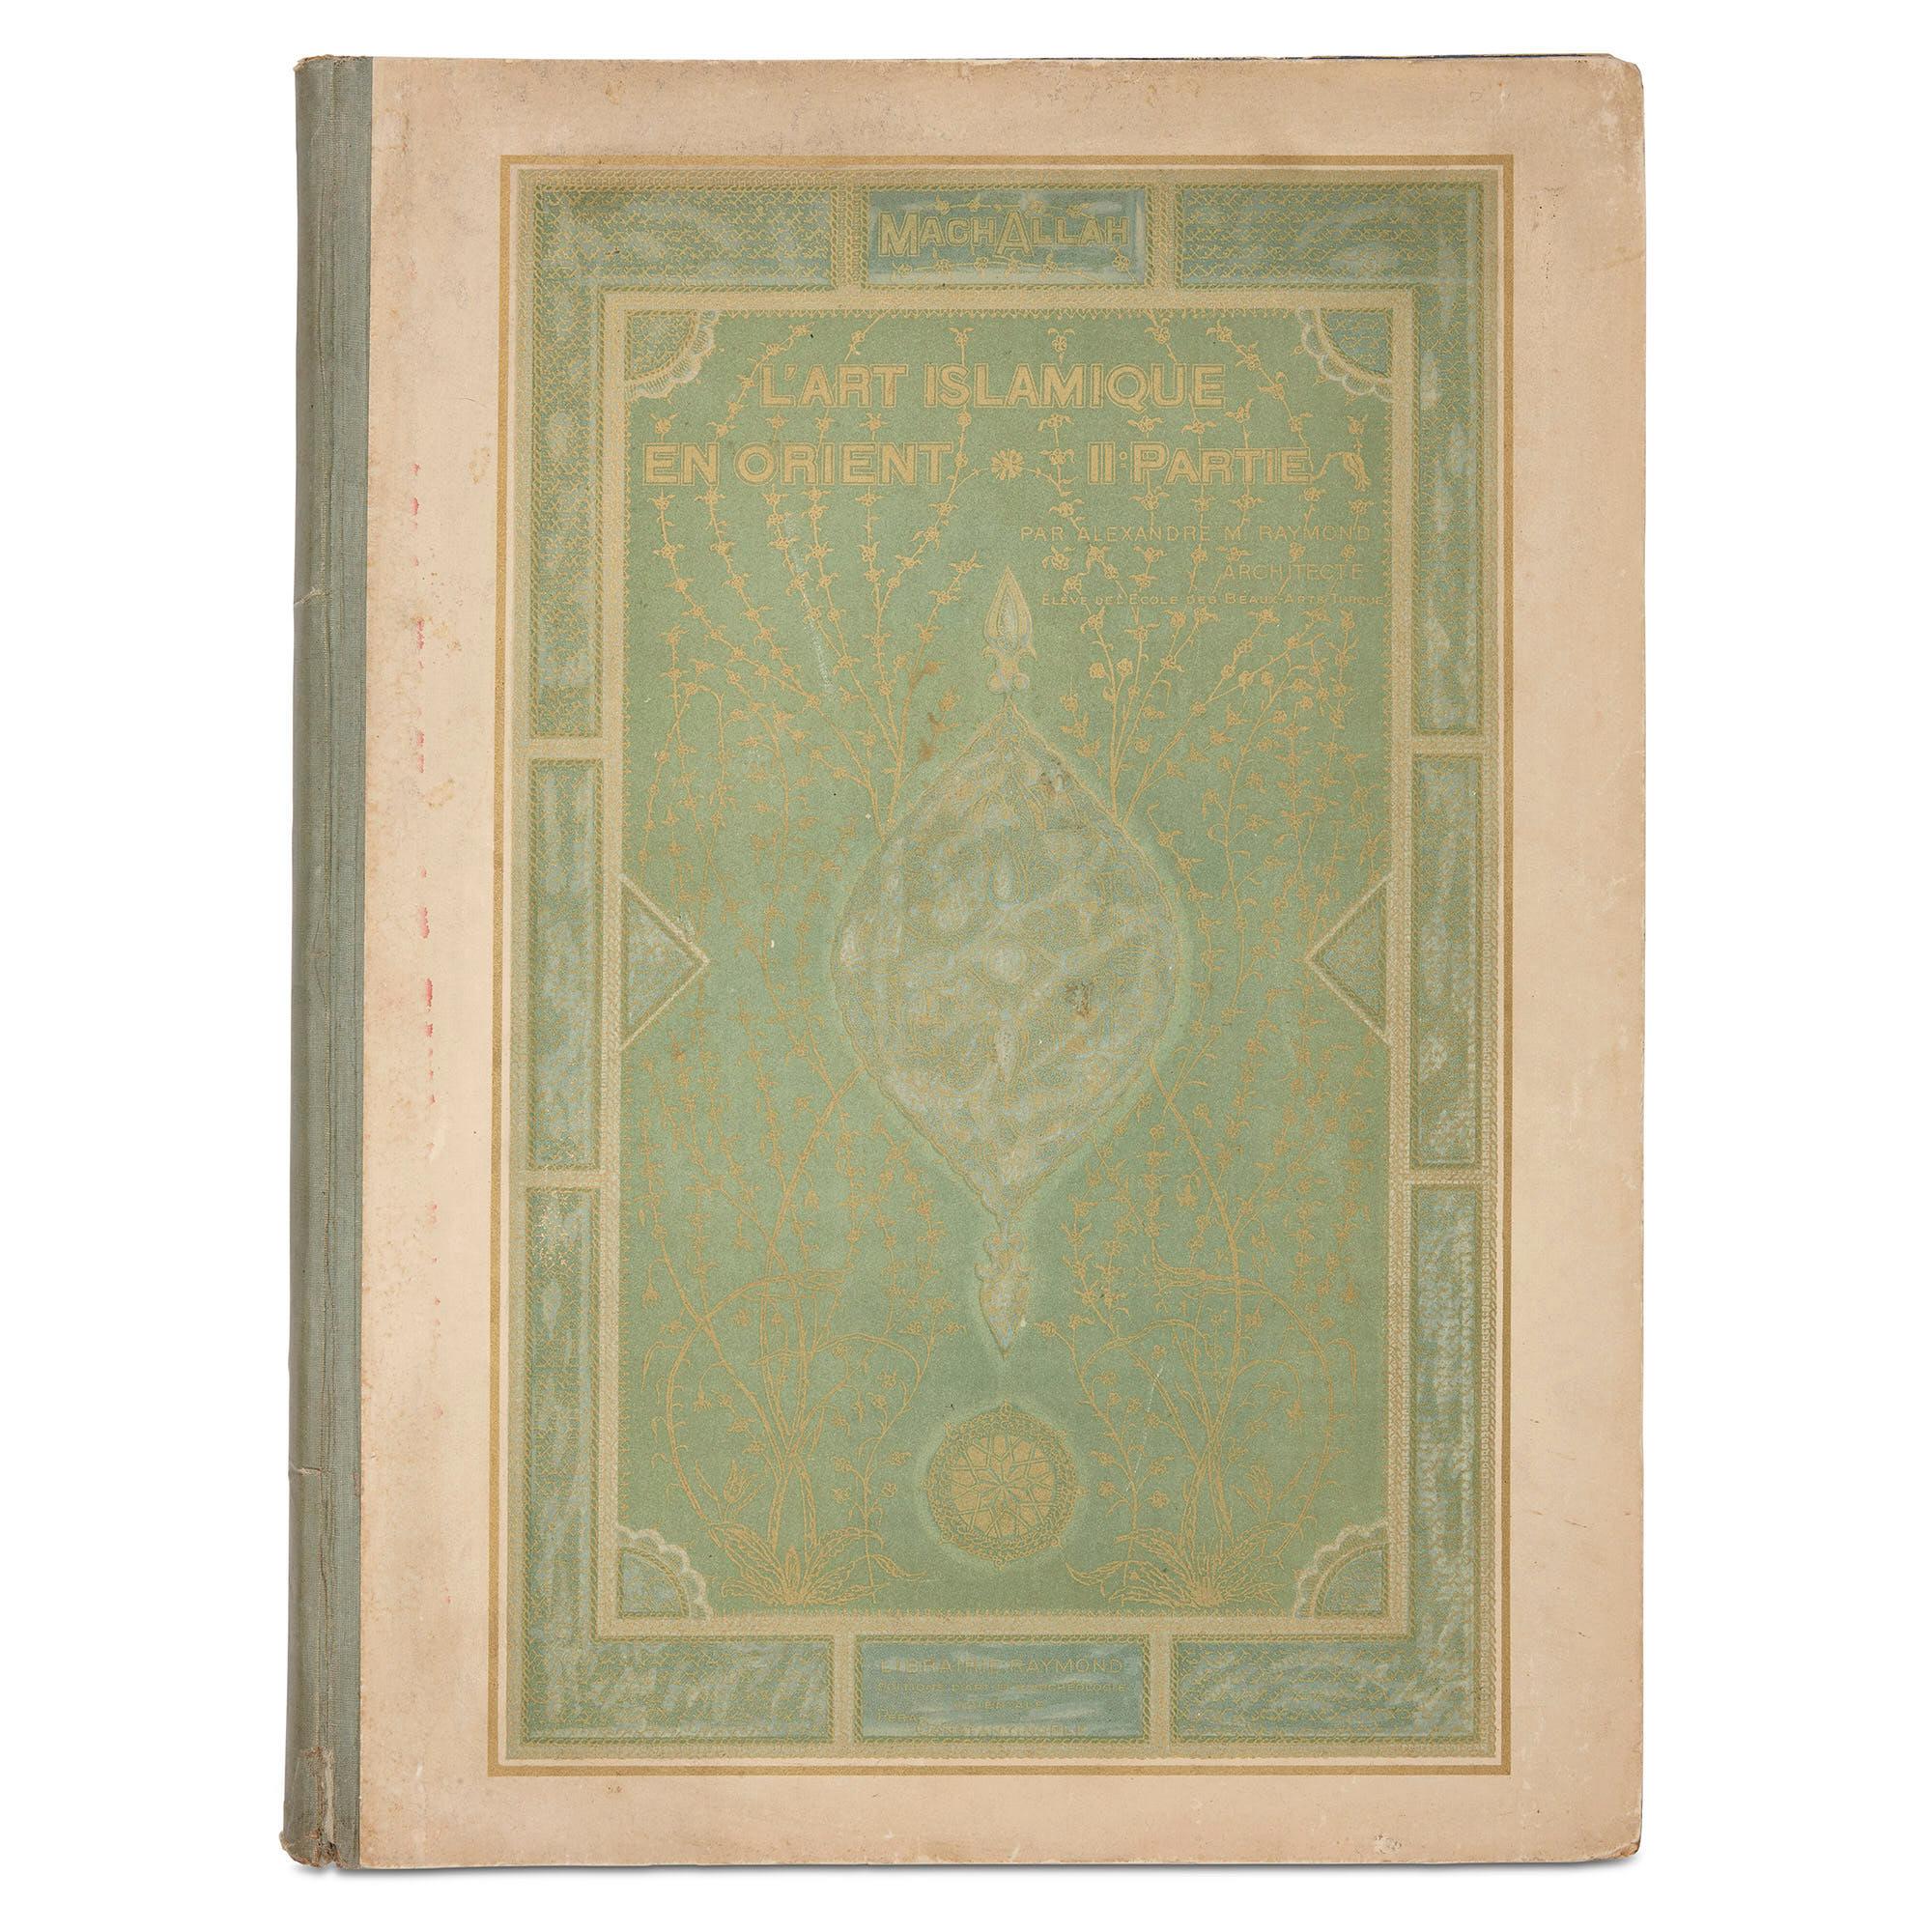 Alexandre M. Raymond, I'art Islamique en Orient, deuxième partie.
French, 1924.
Measures: height 49cm, width 37cm, depth 2cm.

This important book is the second volume of French architect Alexandre Raymond’s 1924 treatise on Islamic architecture